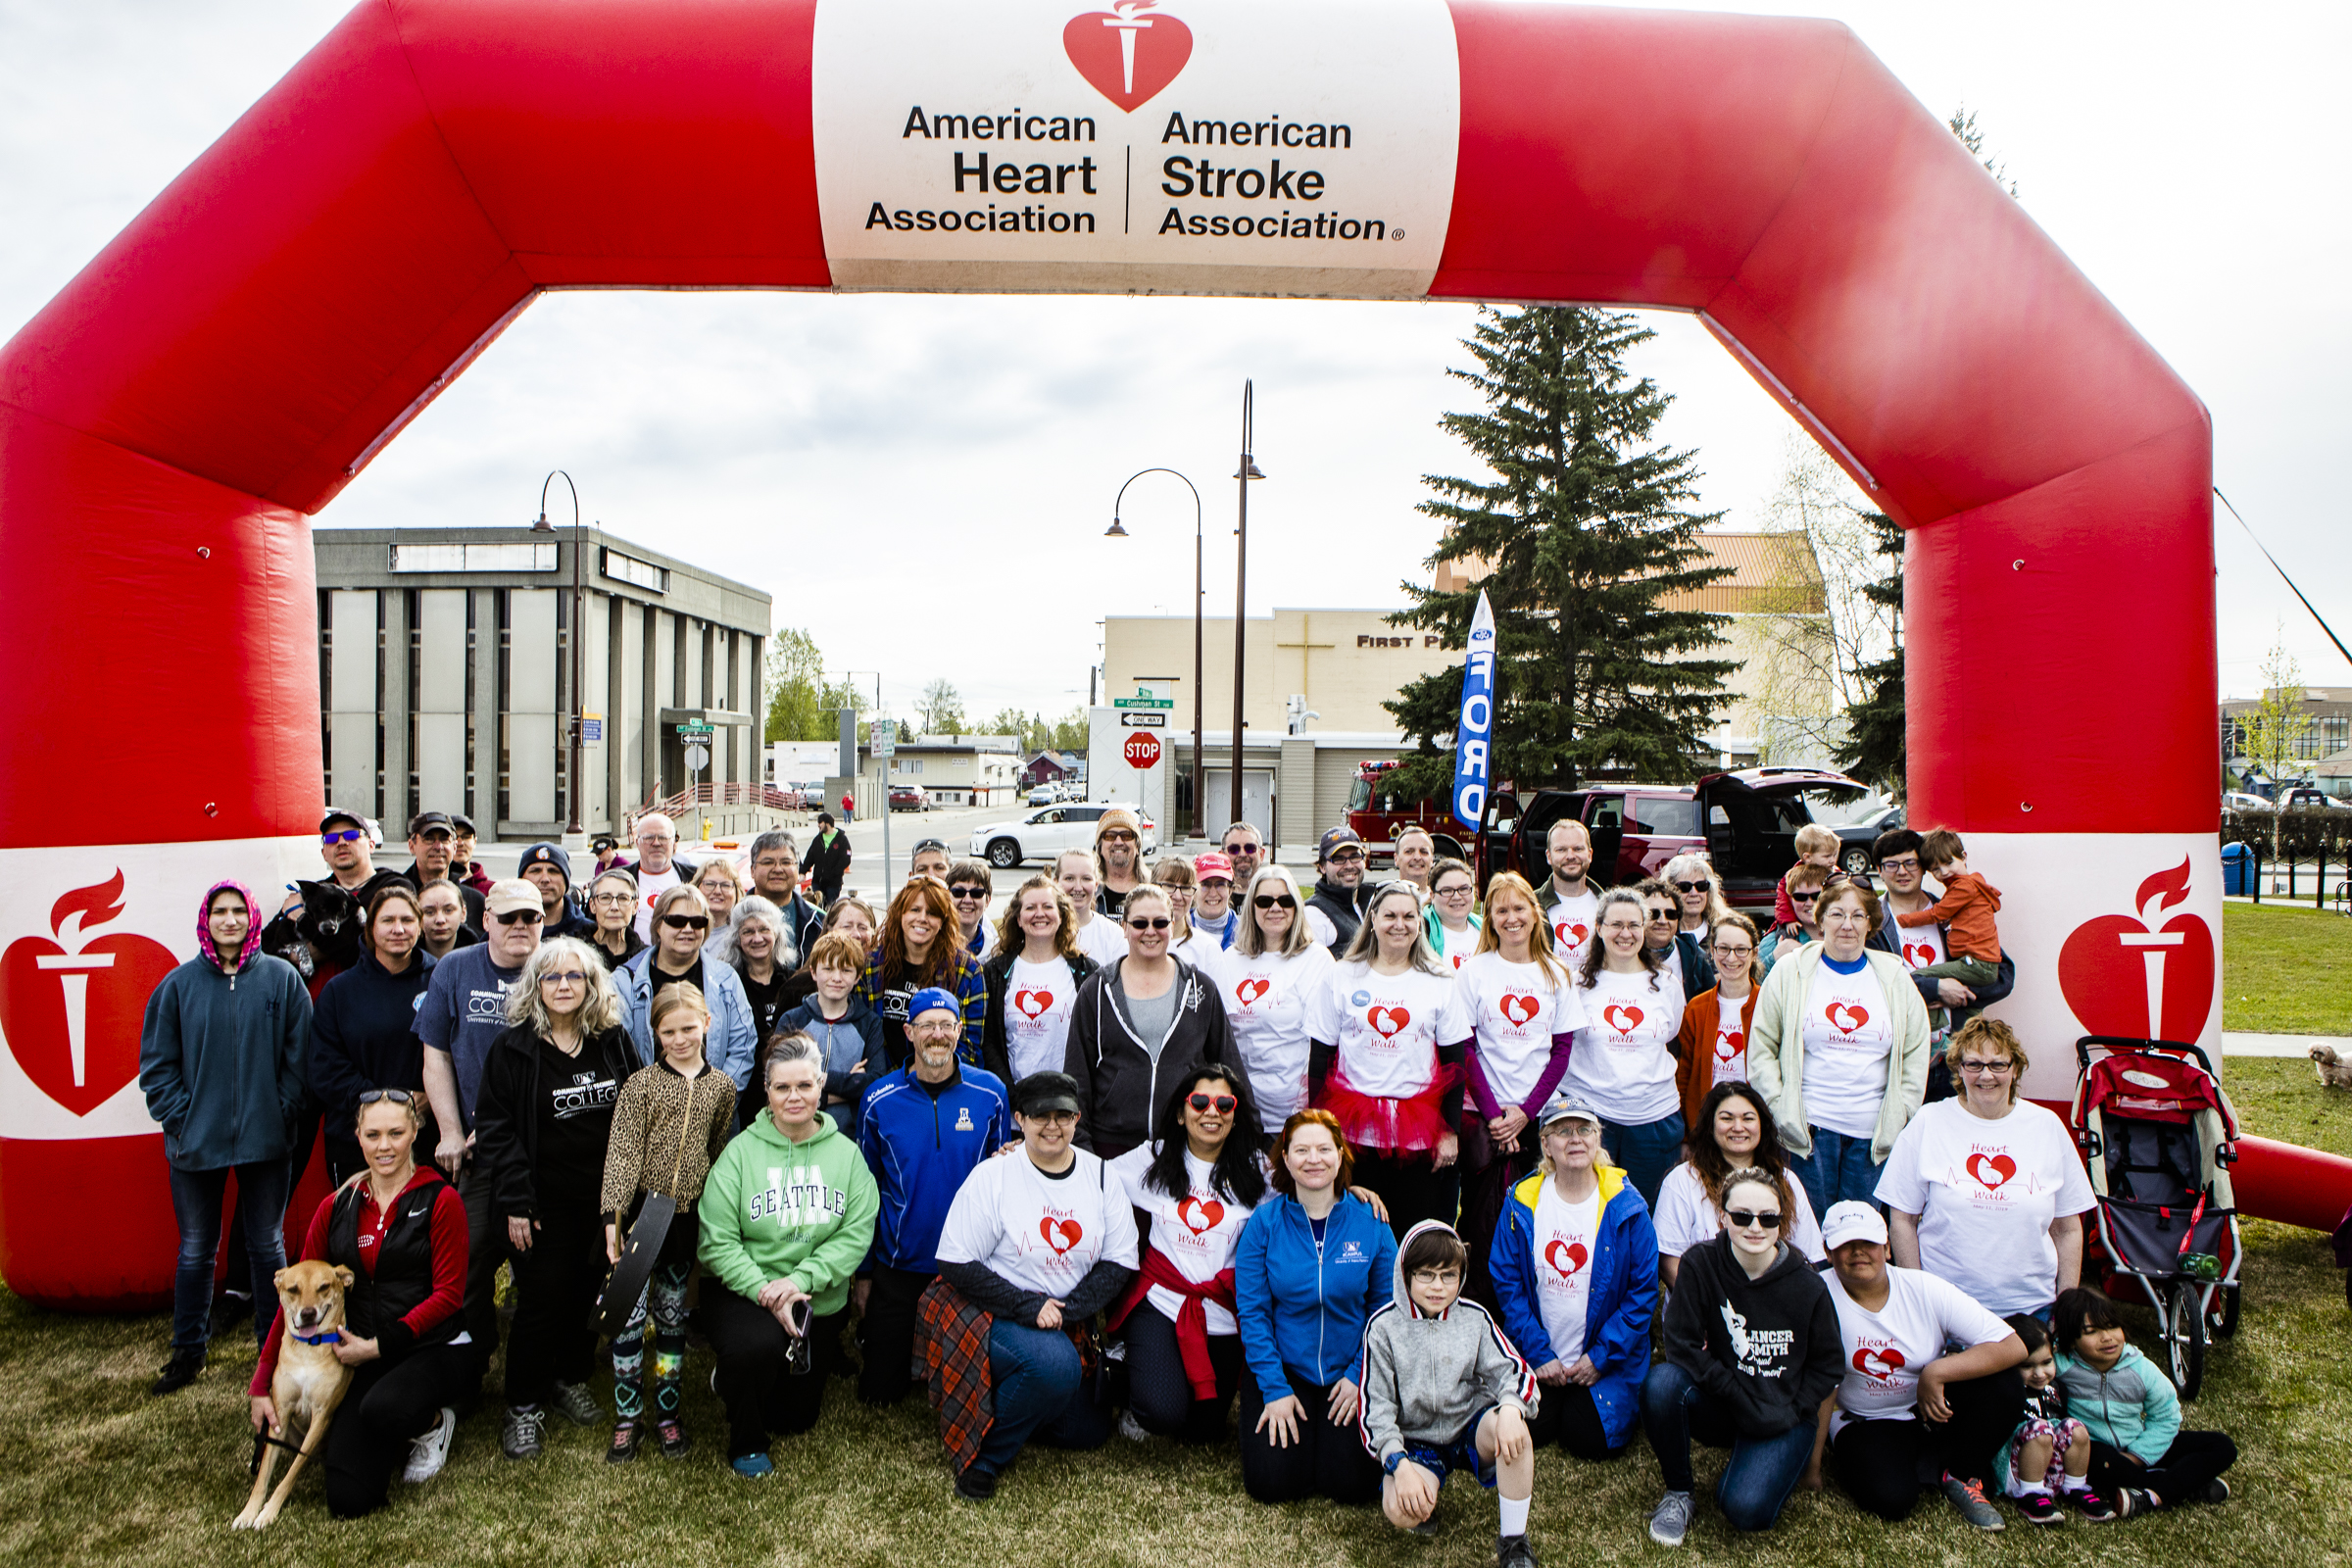 UAF community members gather for a photo at the 2019 Fairbanks Heart Walk